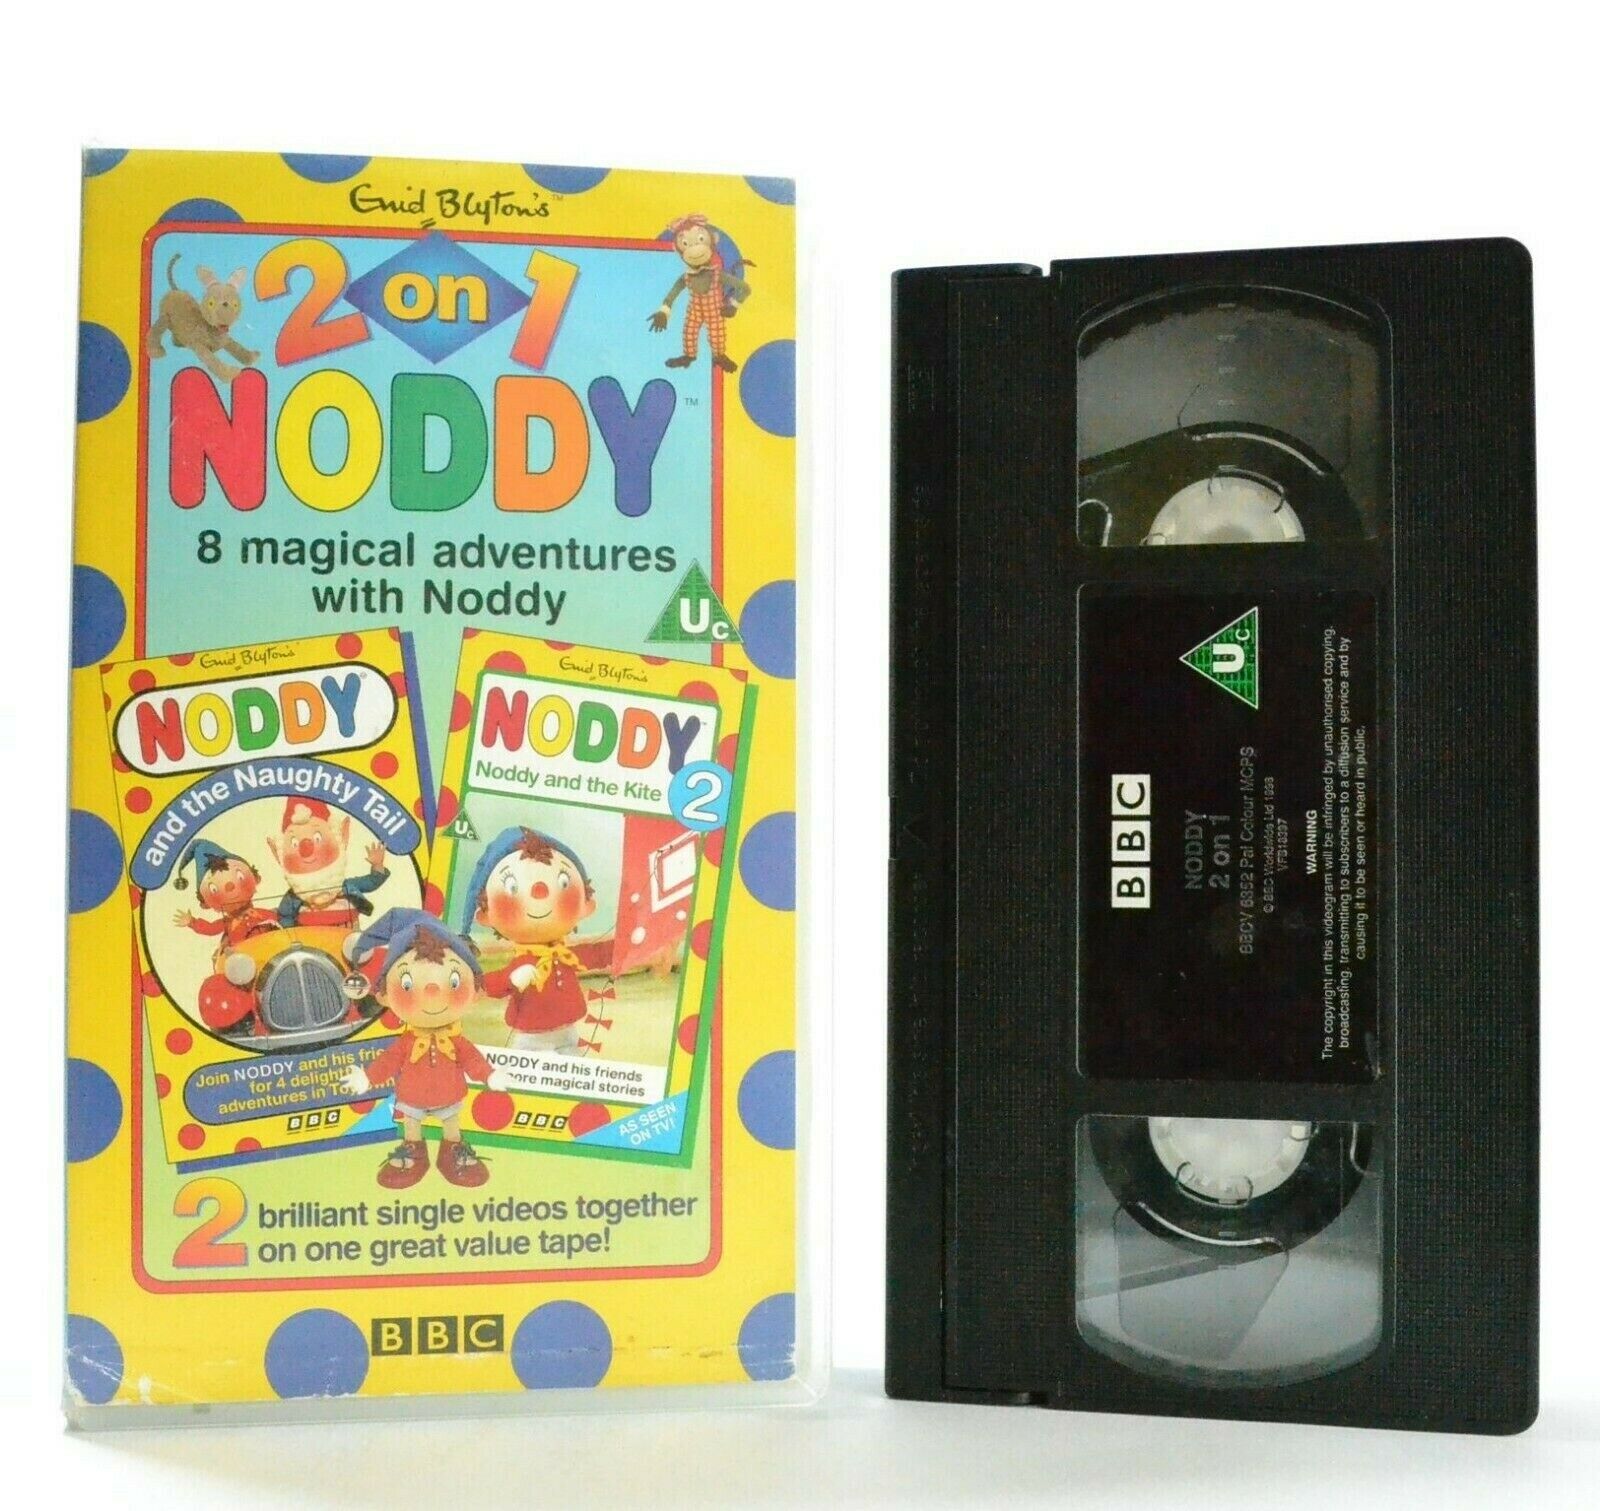 Noddy: 2 On 1 - 8 Magical Adventures - BBC Classic - Educational - Kids - VHS-